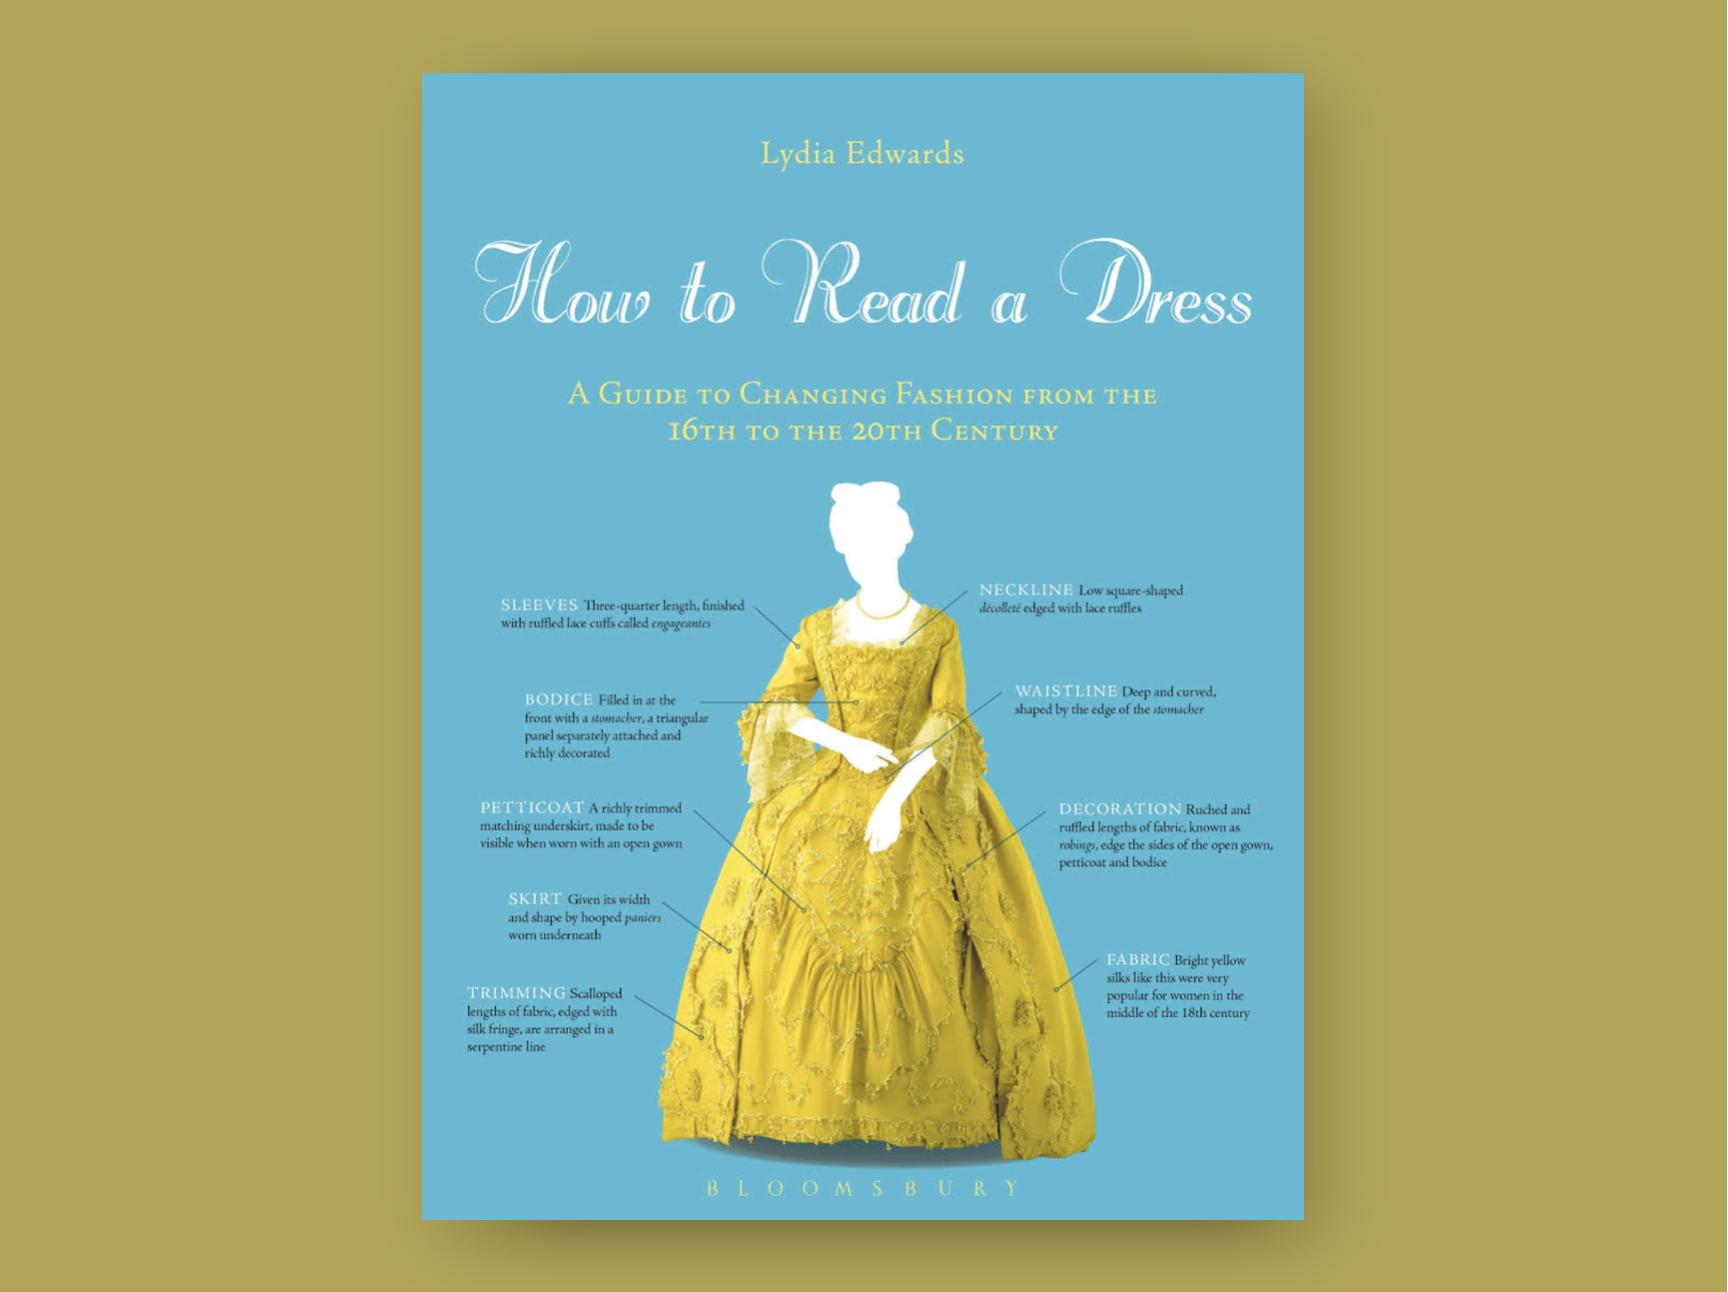 How to Read a Dress Image.png